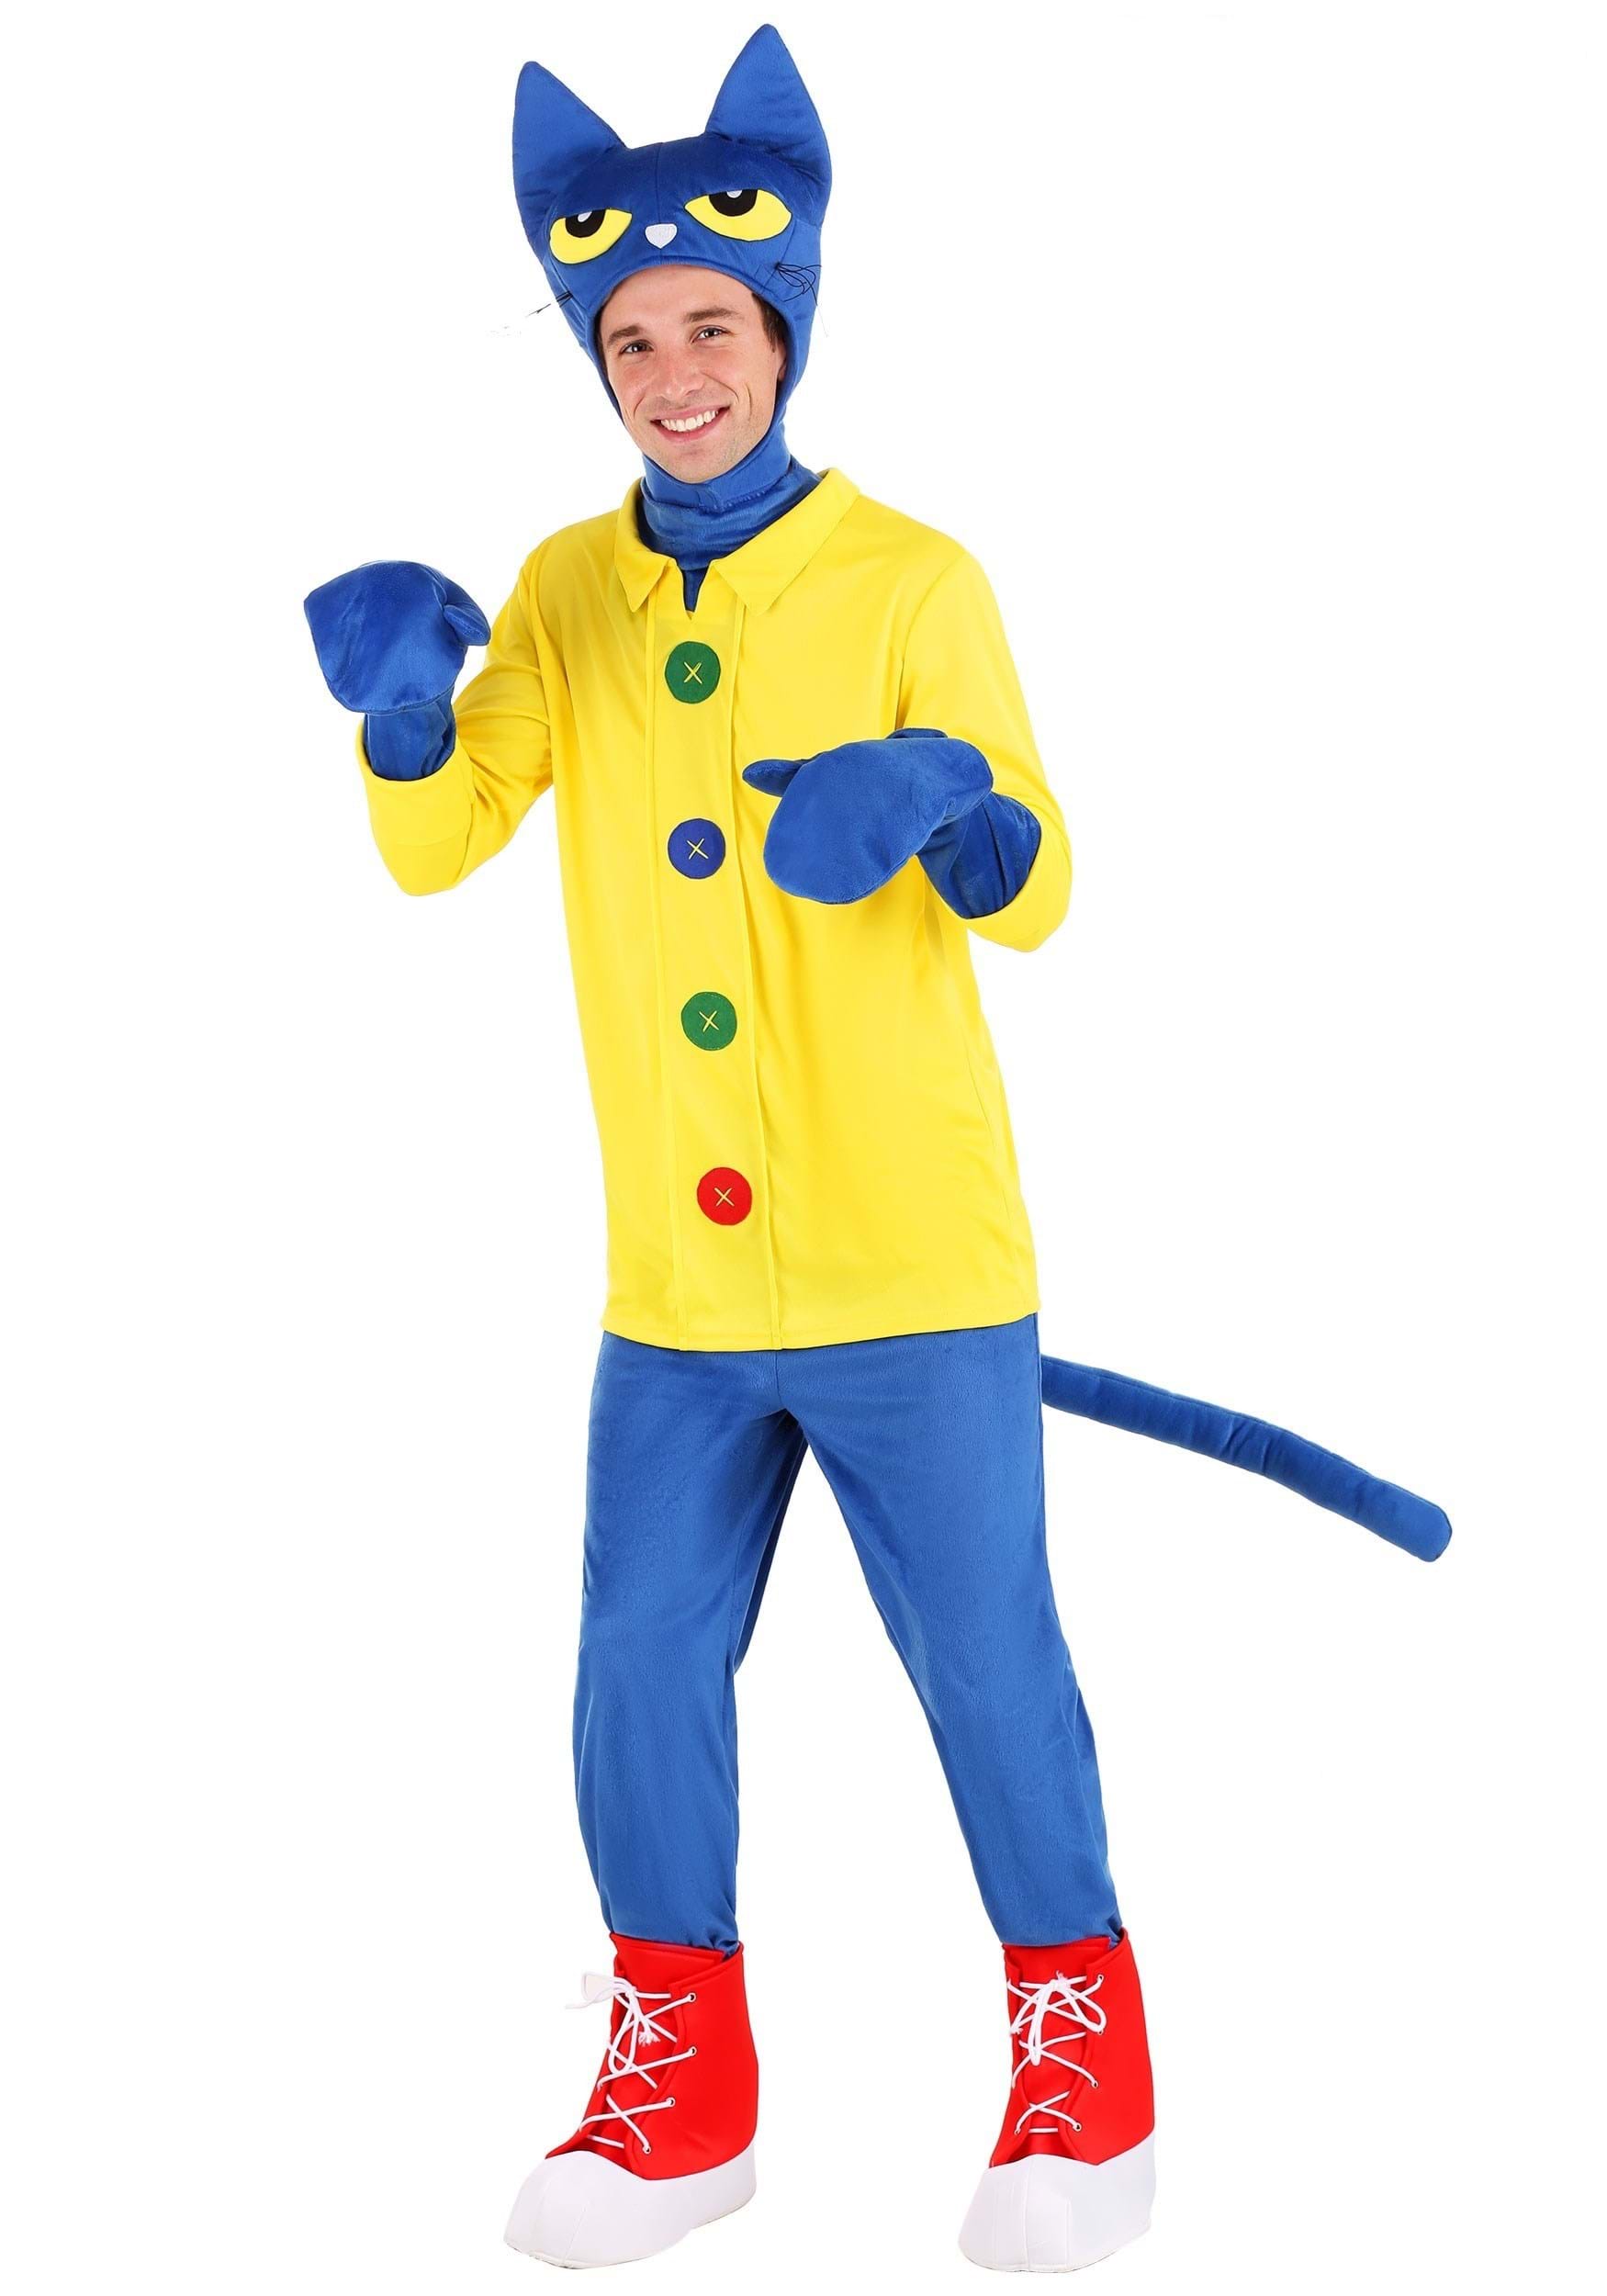 Photos - Fancy Dress CATerpillar FUN Costumes Pete the Cat Plus Size Costume for Adults Blue/Red/Ye 